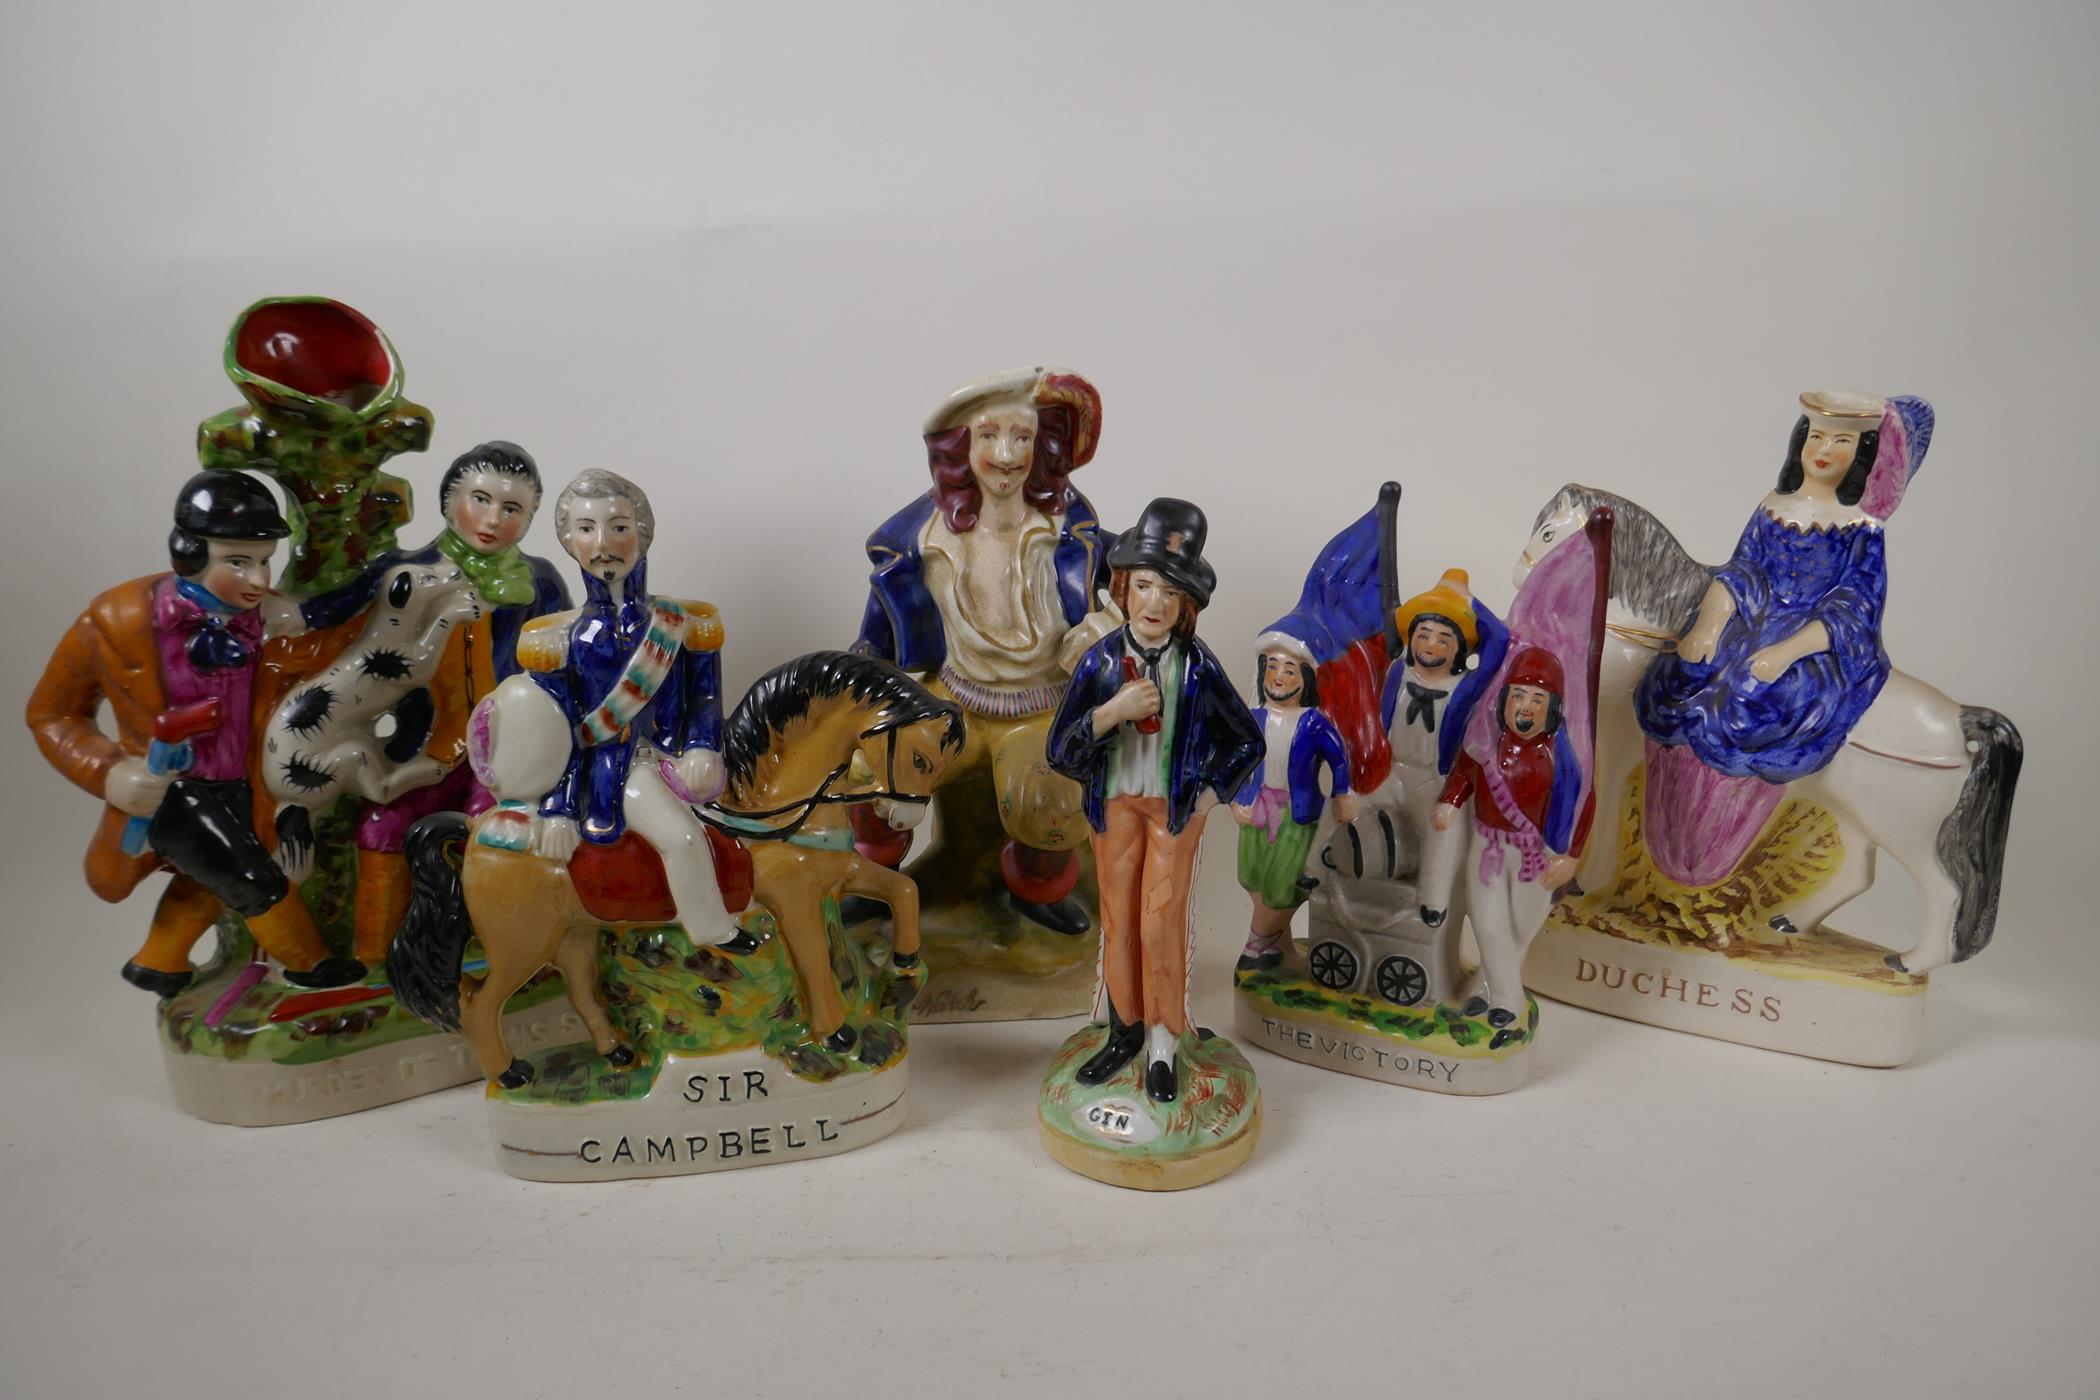 Six Staffordshire figures, Duchess, The Murder of Thomas Smith, Gin and Water, The Victory (